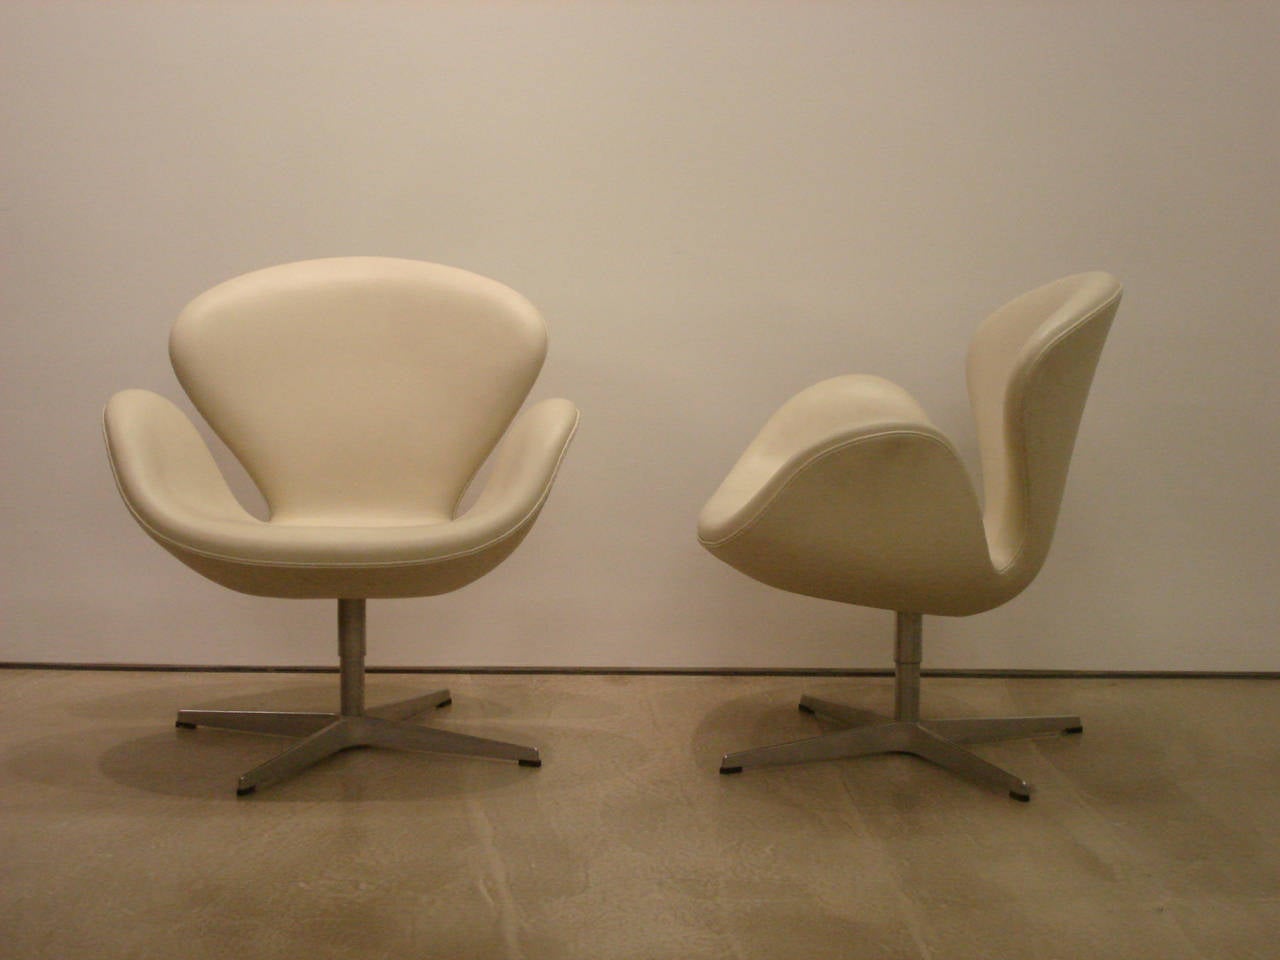 A pair of Swan Chairs in white leather by Arne Jacobsen. Made by Frits Hansen. Designed 1958. 

The 